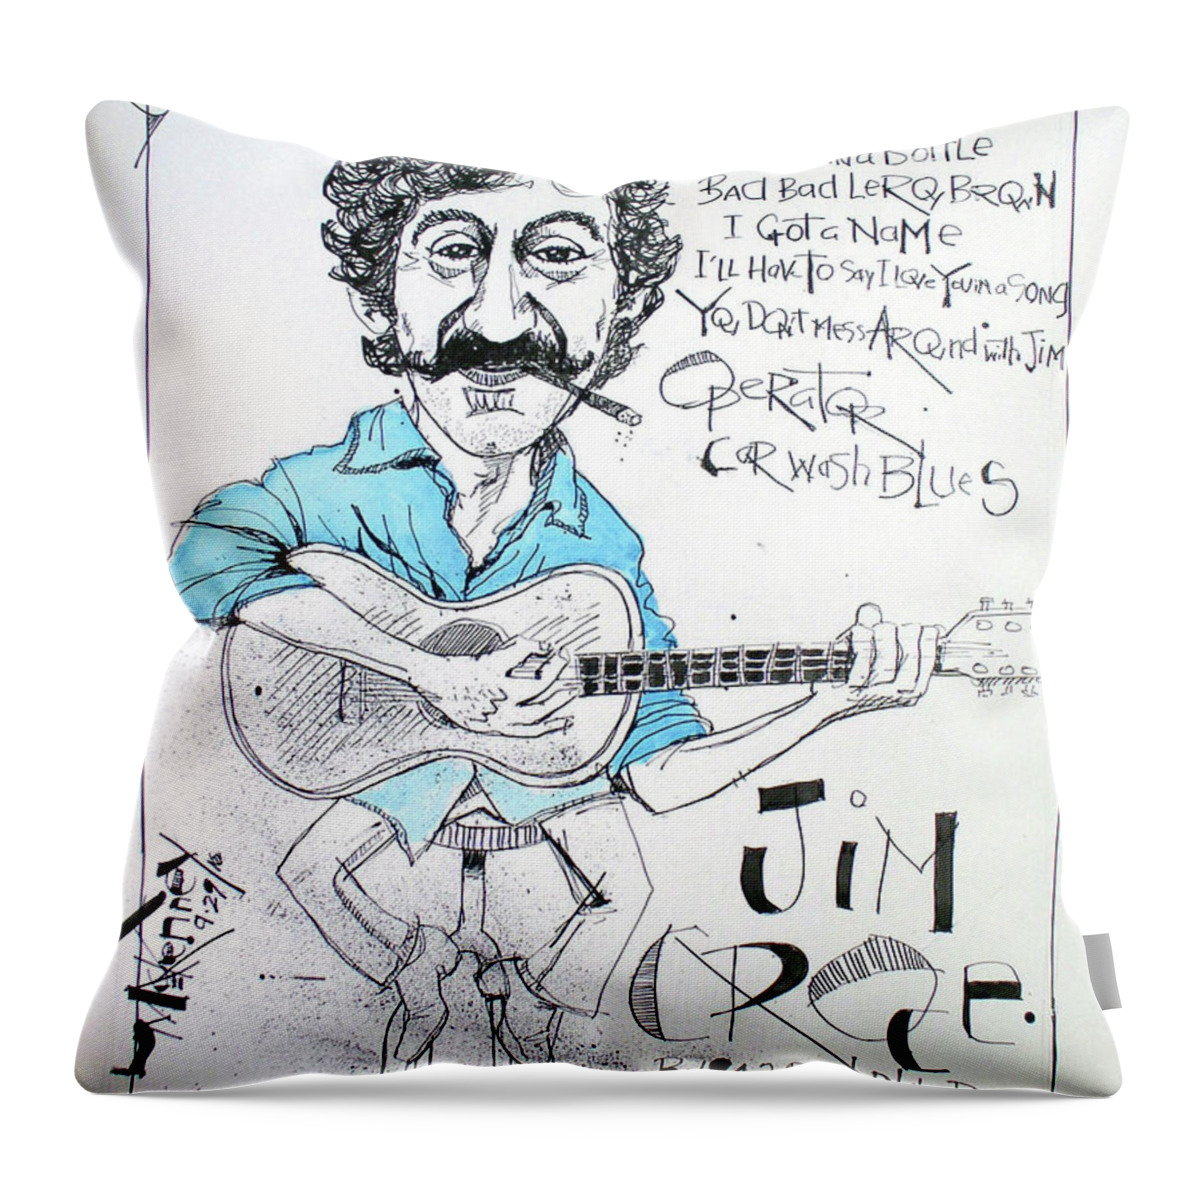  Throw Pillow featuring the drawing Jim Croce by Phil Mckenney